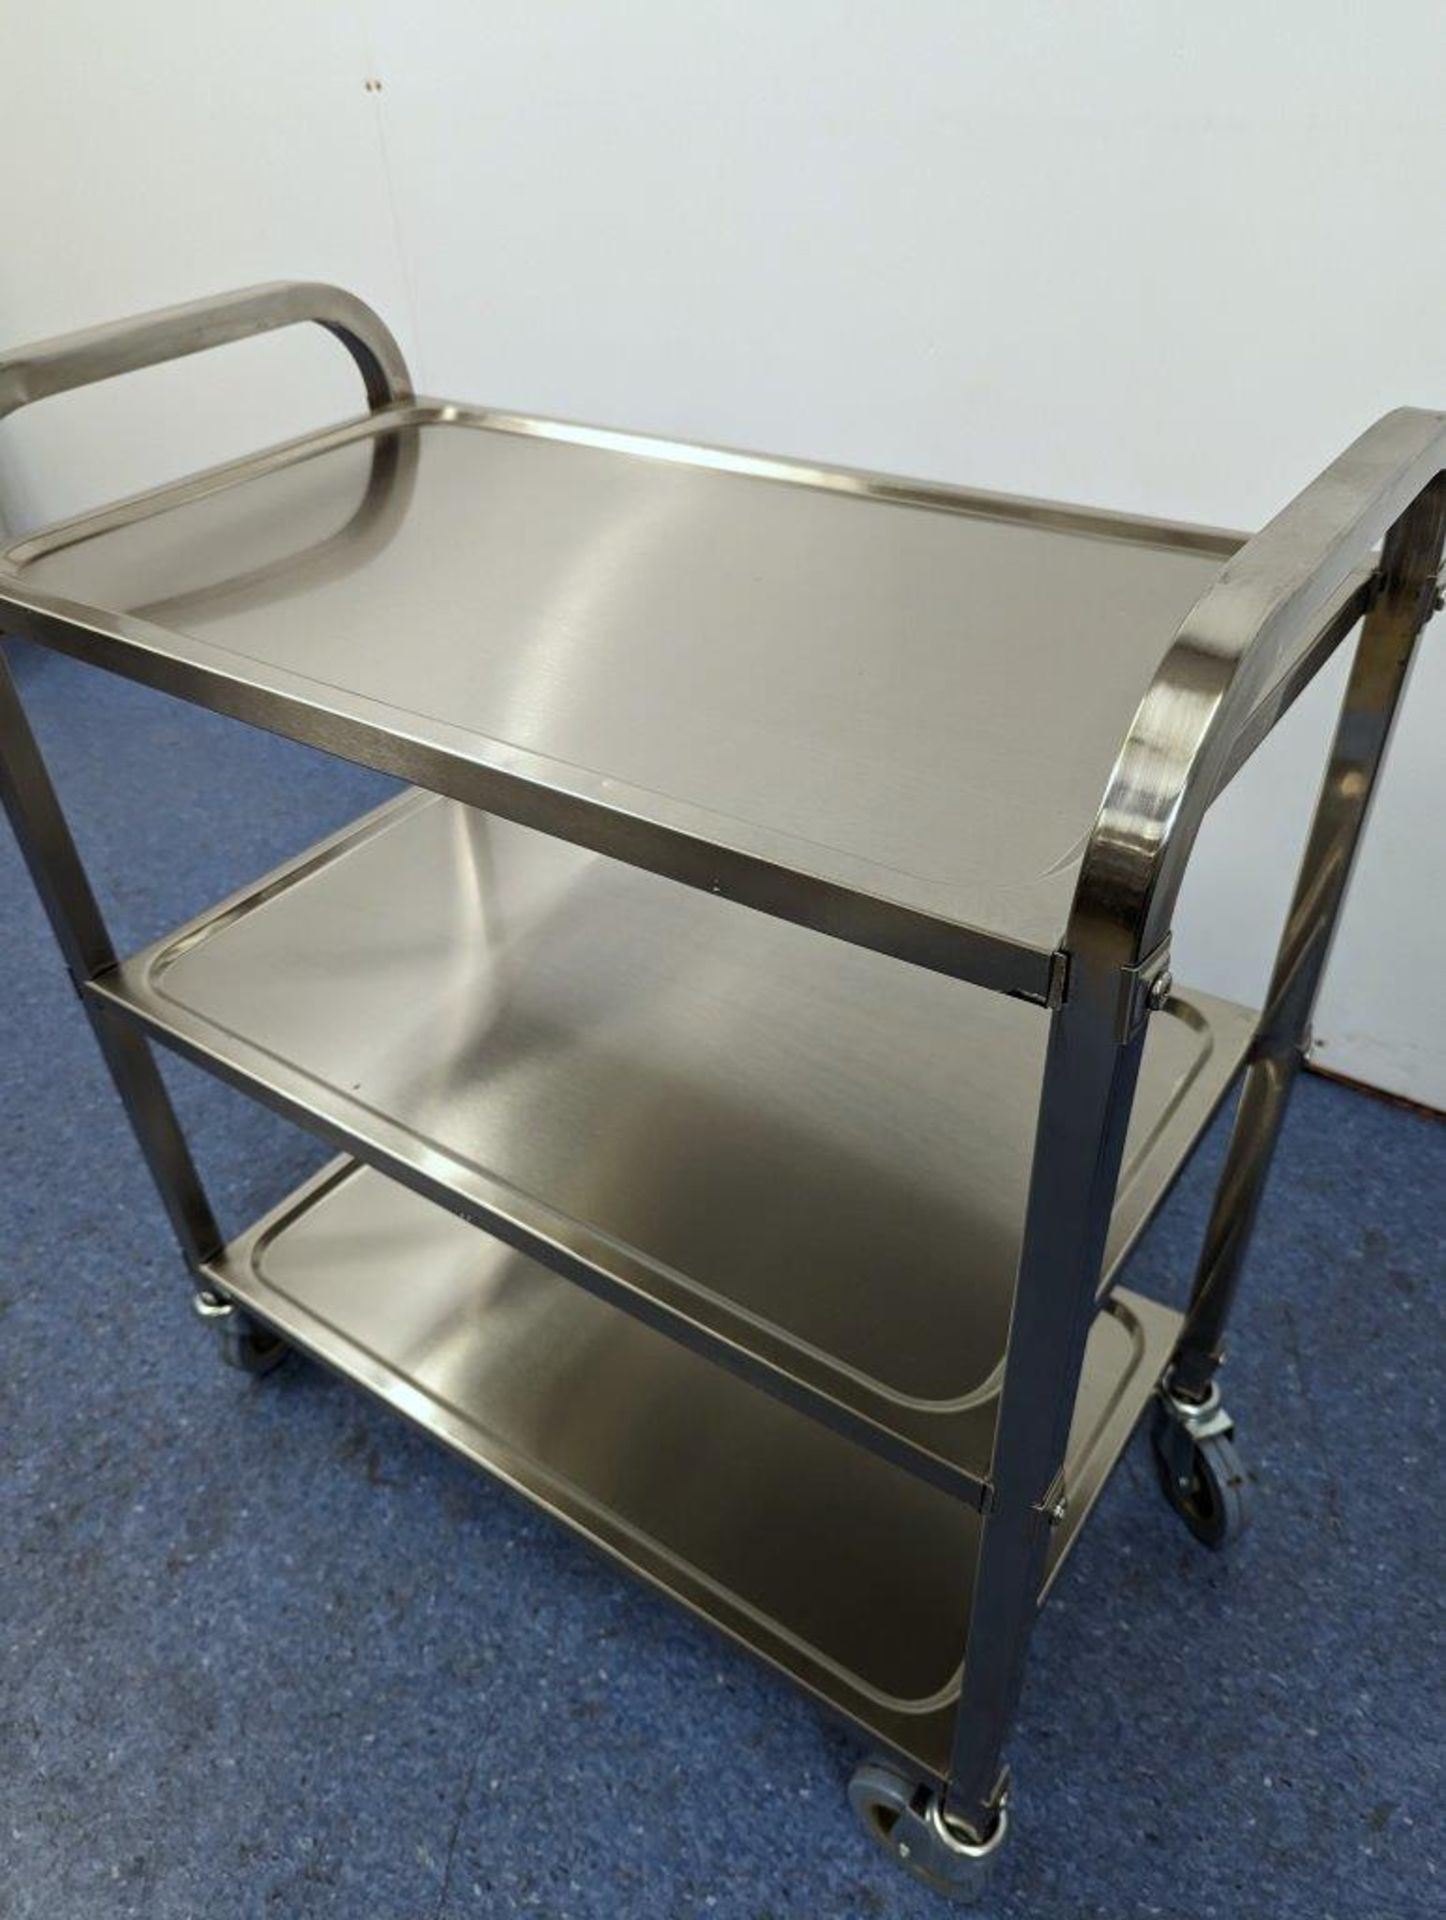 STAINLESS STEEL BUSSING CART WITH 27.25" X 15.75" TRAY SIZE, OMCAN 24418 - Image 5 of 5